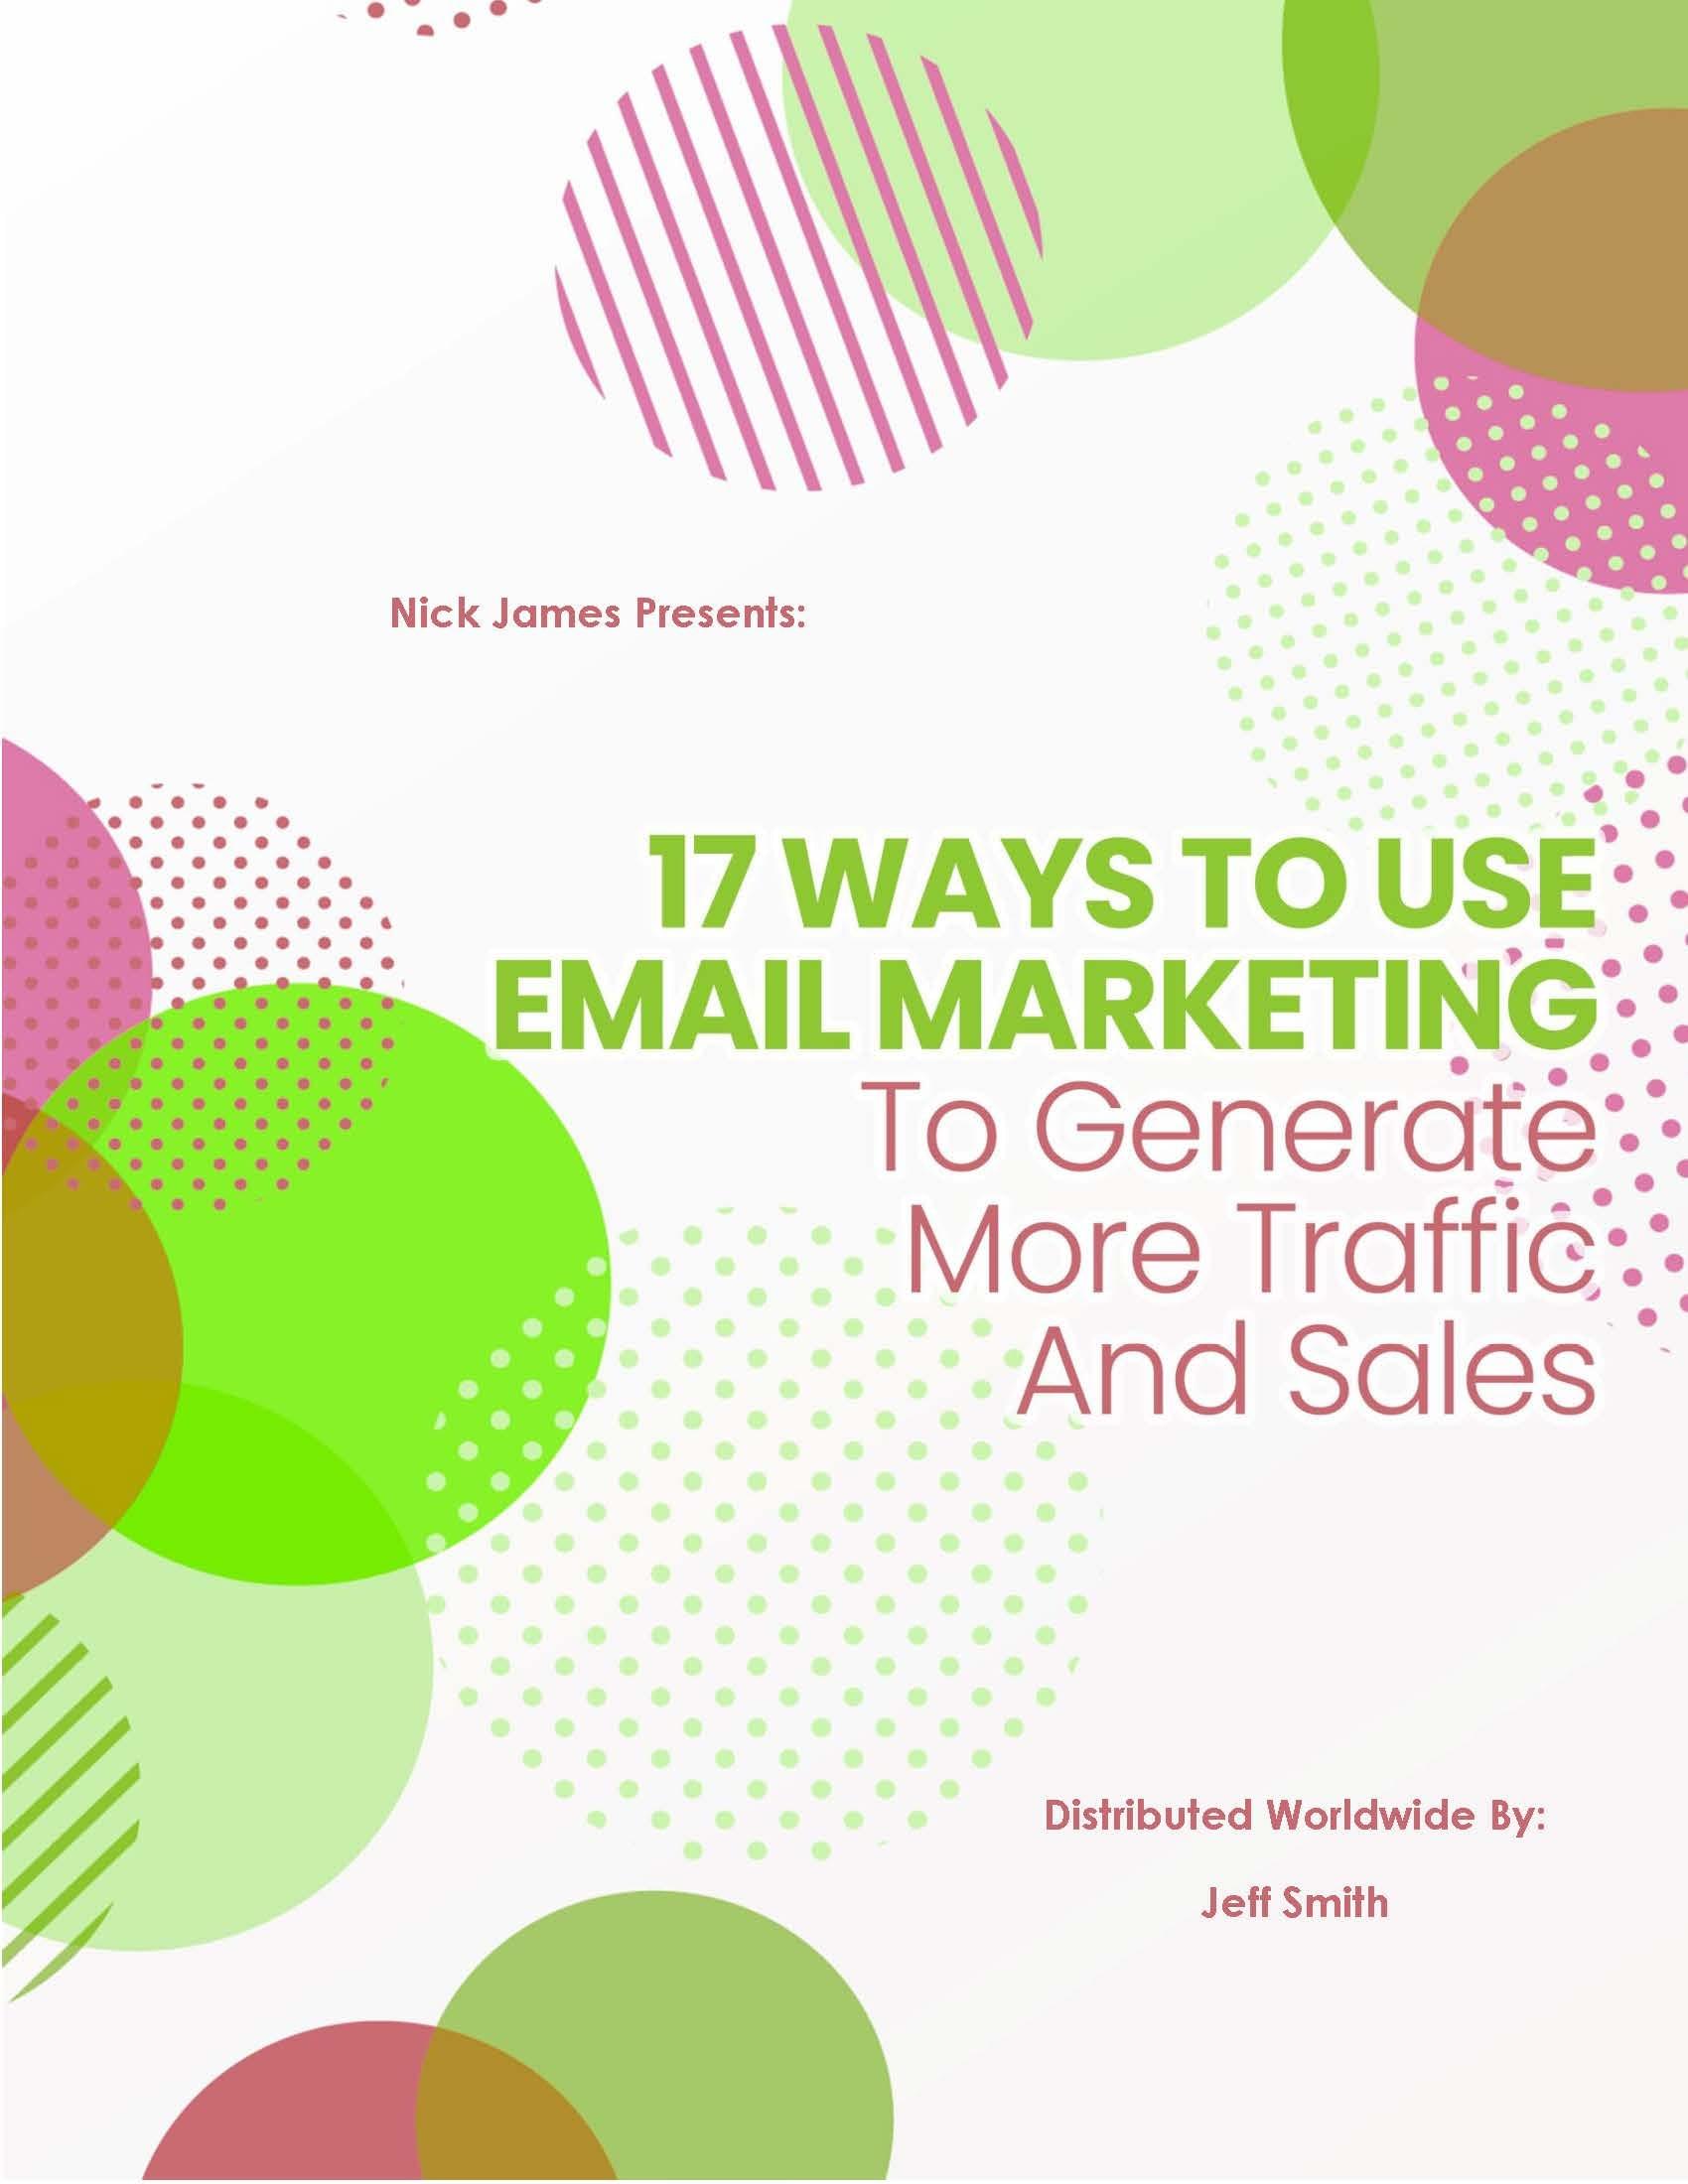 17 Ways To Use Email Marketing To Generate More Traffic And Sales